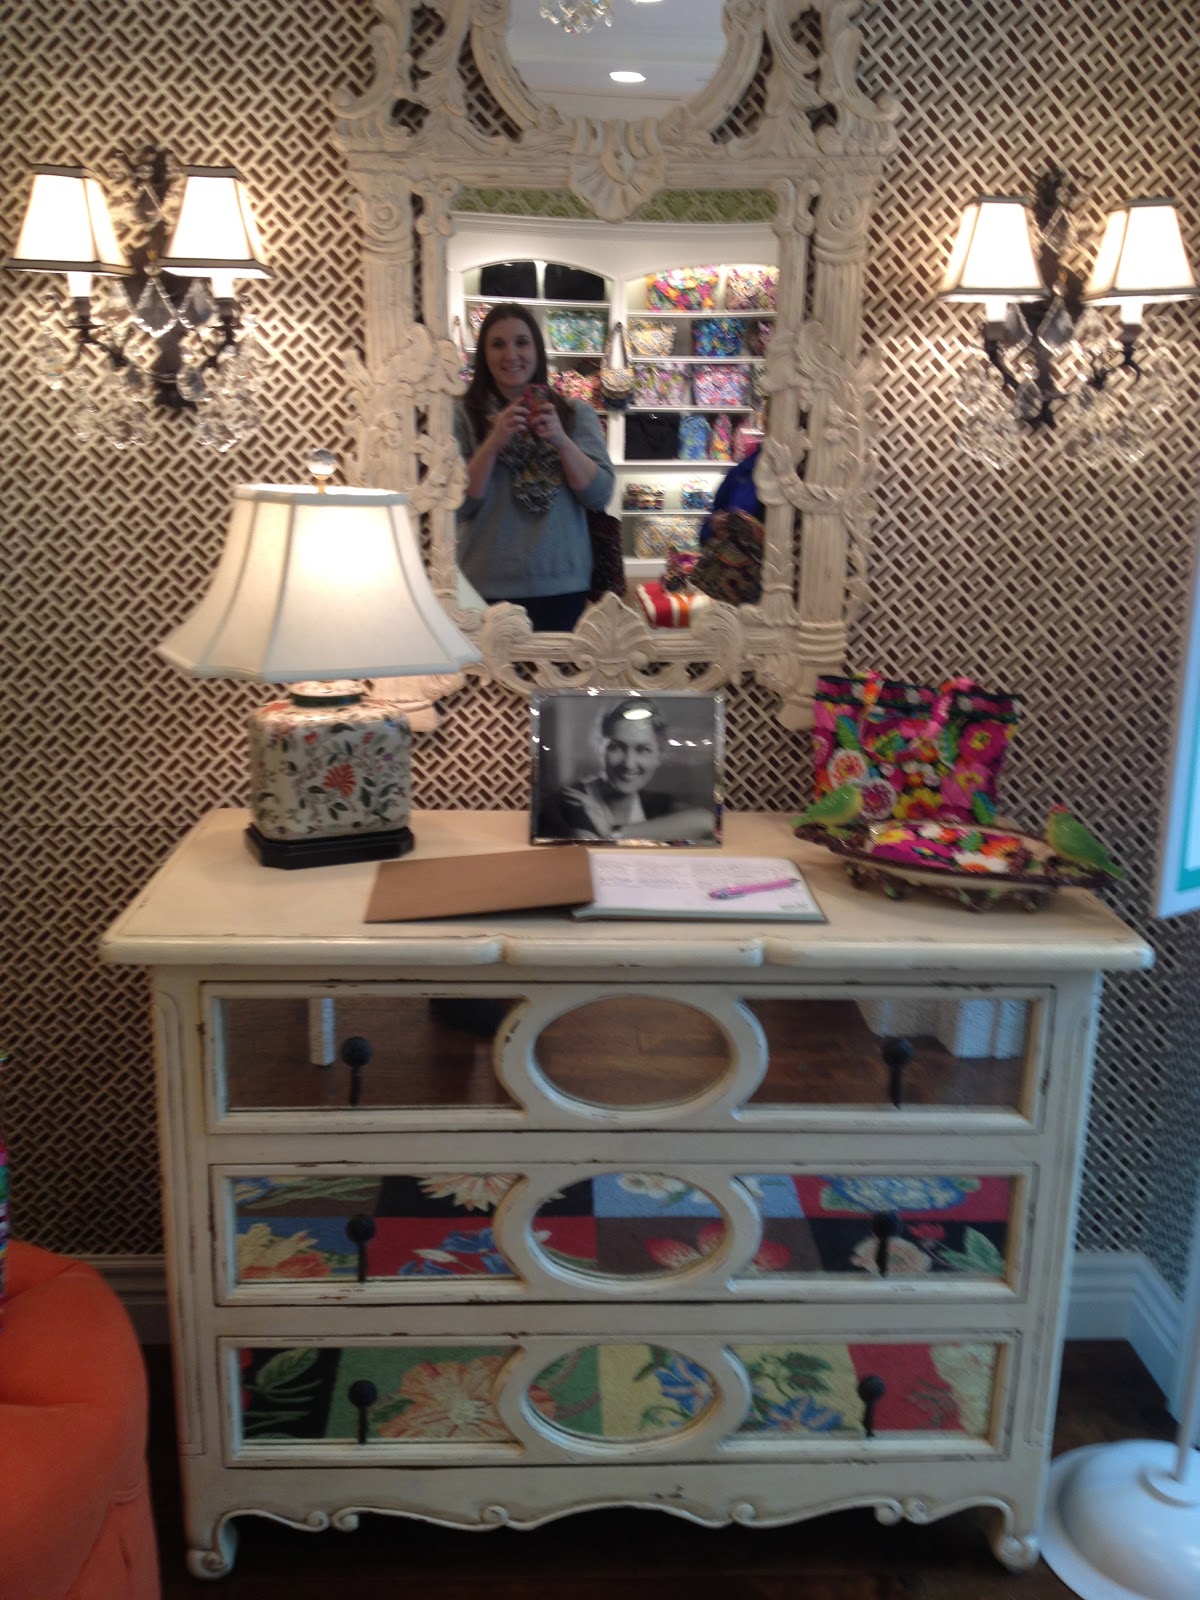 OhMyVera! A blog about all things Vera Bradley: New Vera Bradley Store at Towson Town Center